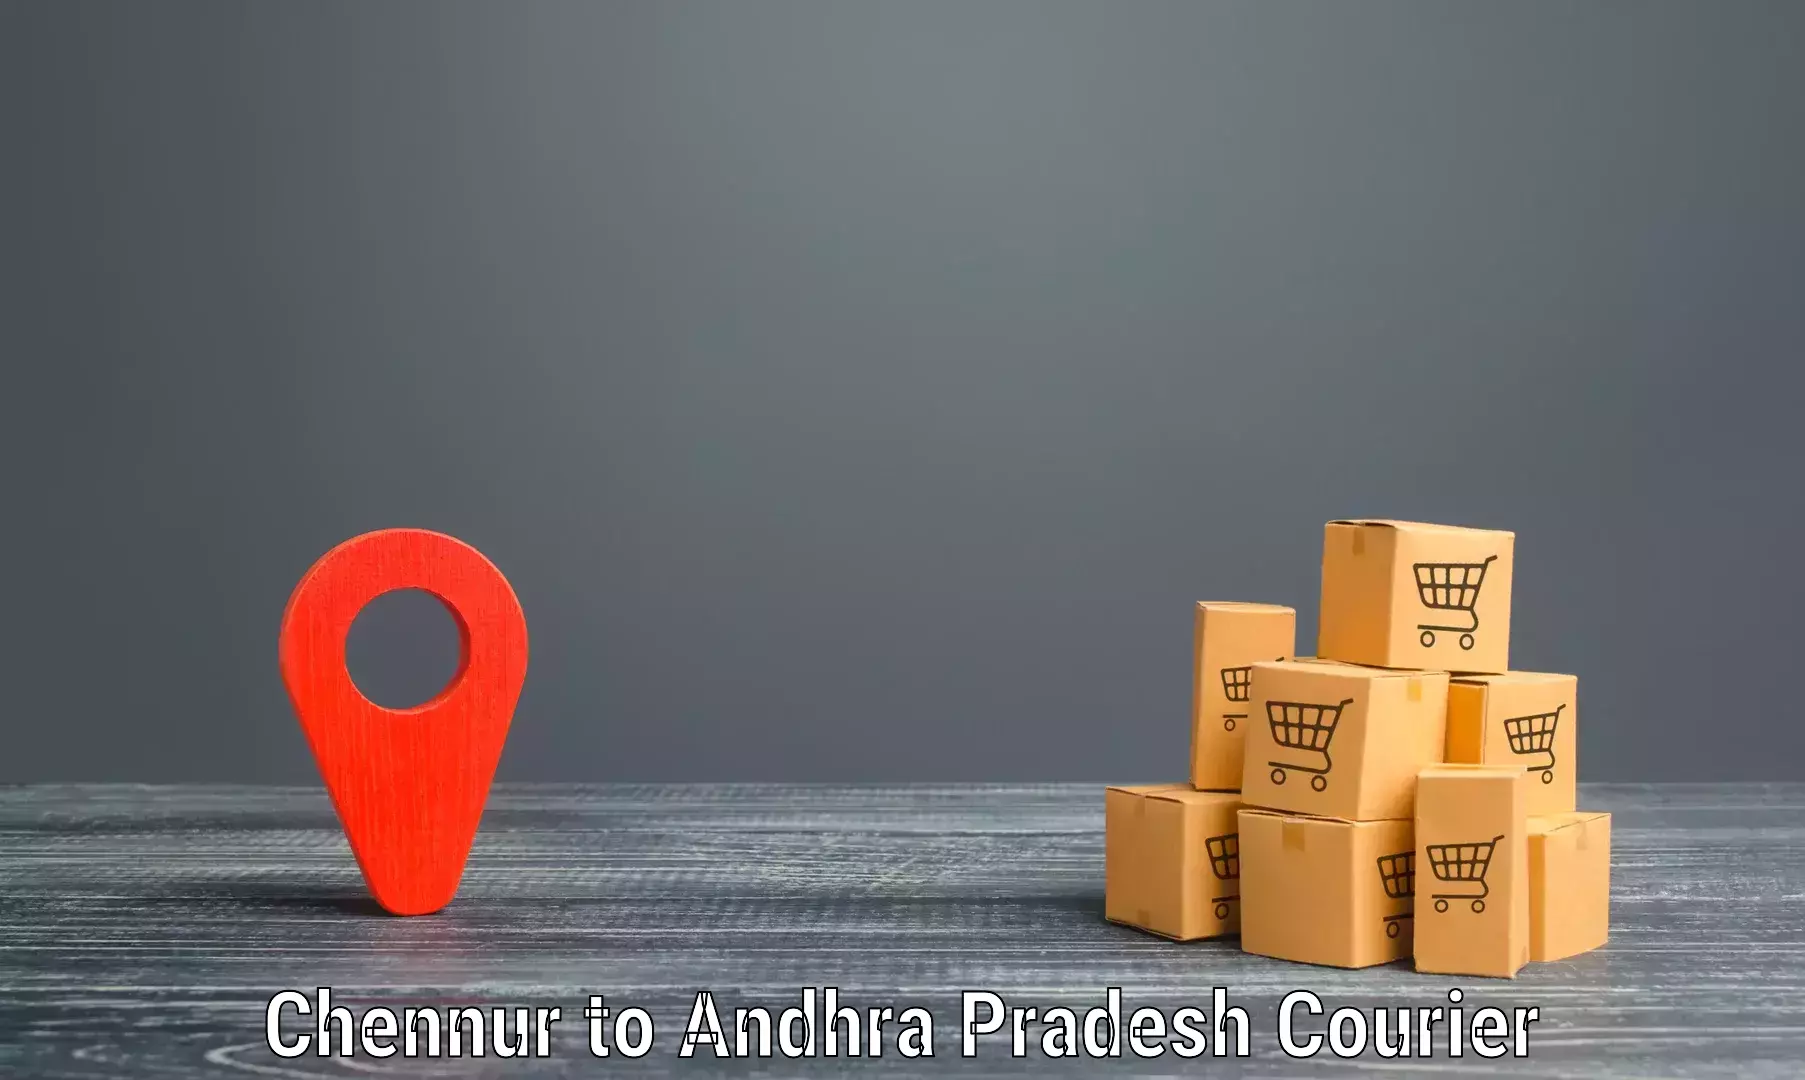 Expedited parcel delivery in Chennur to Yerravaram